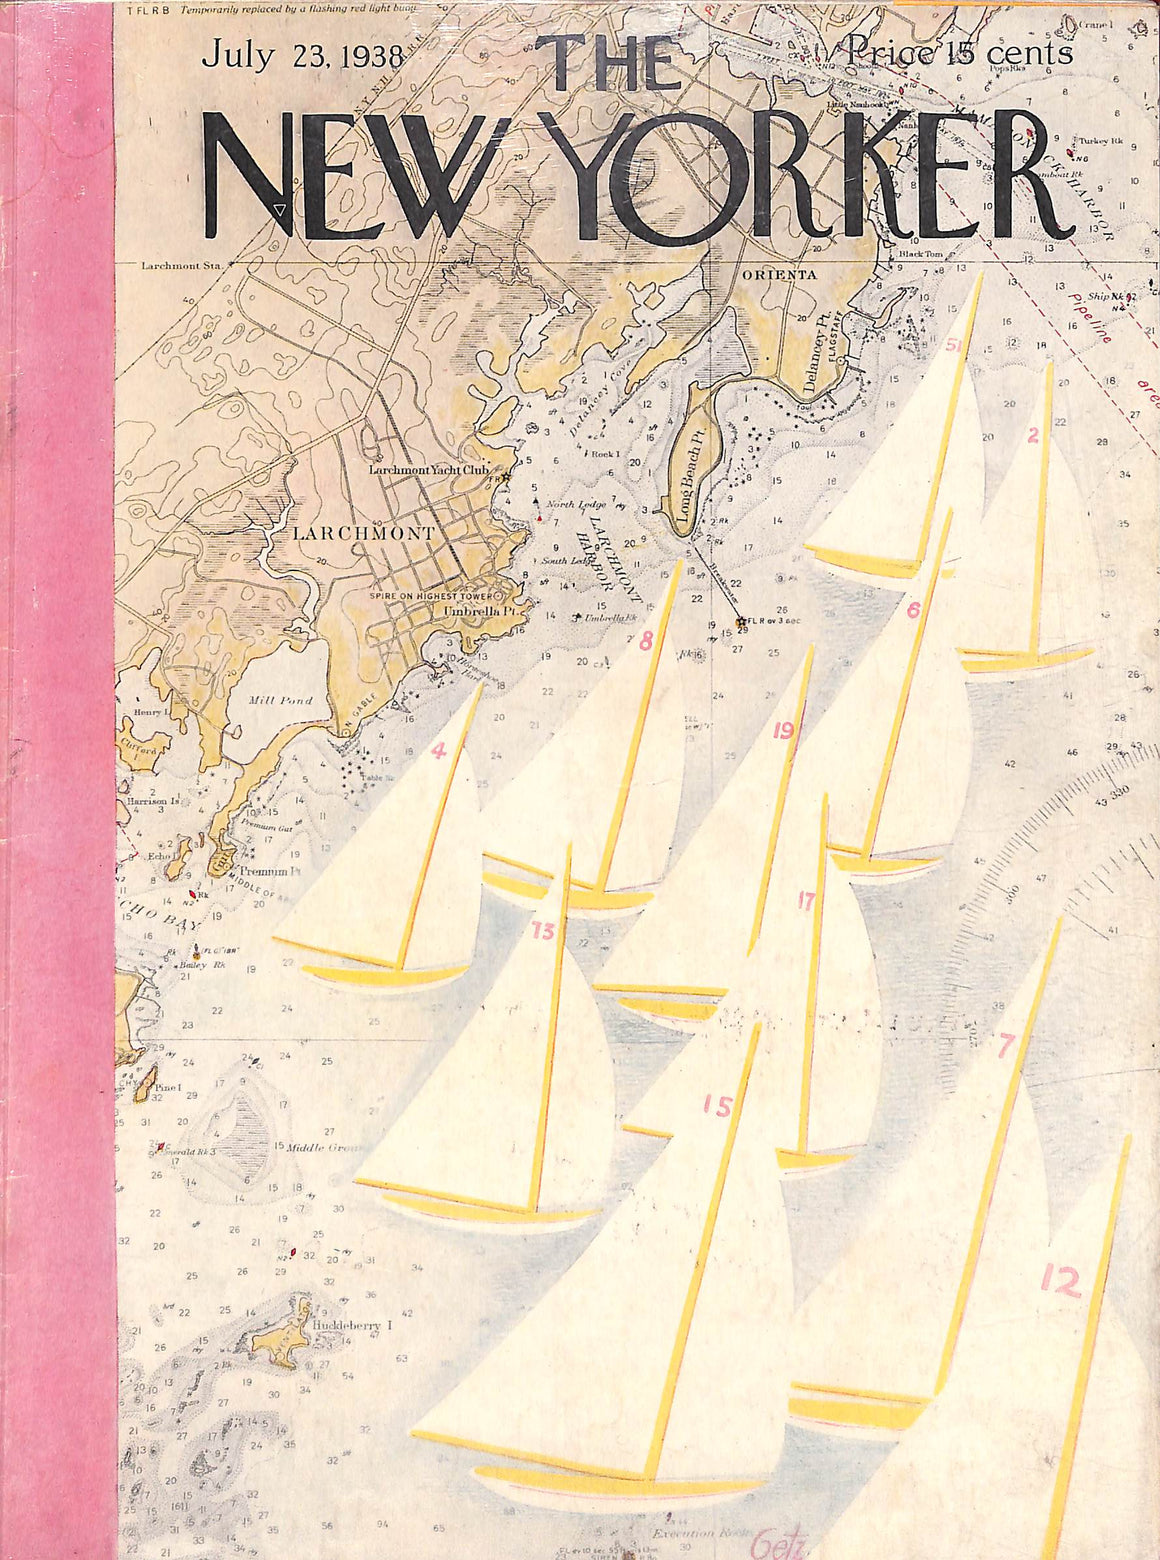 "The New Yorker July 23, 1938" (SOLD)